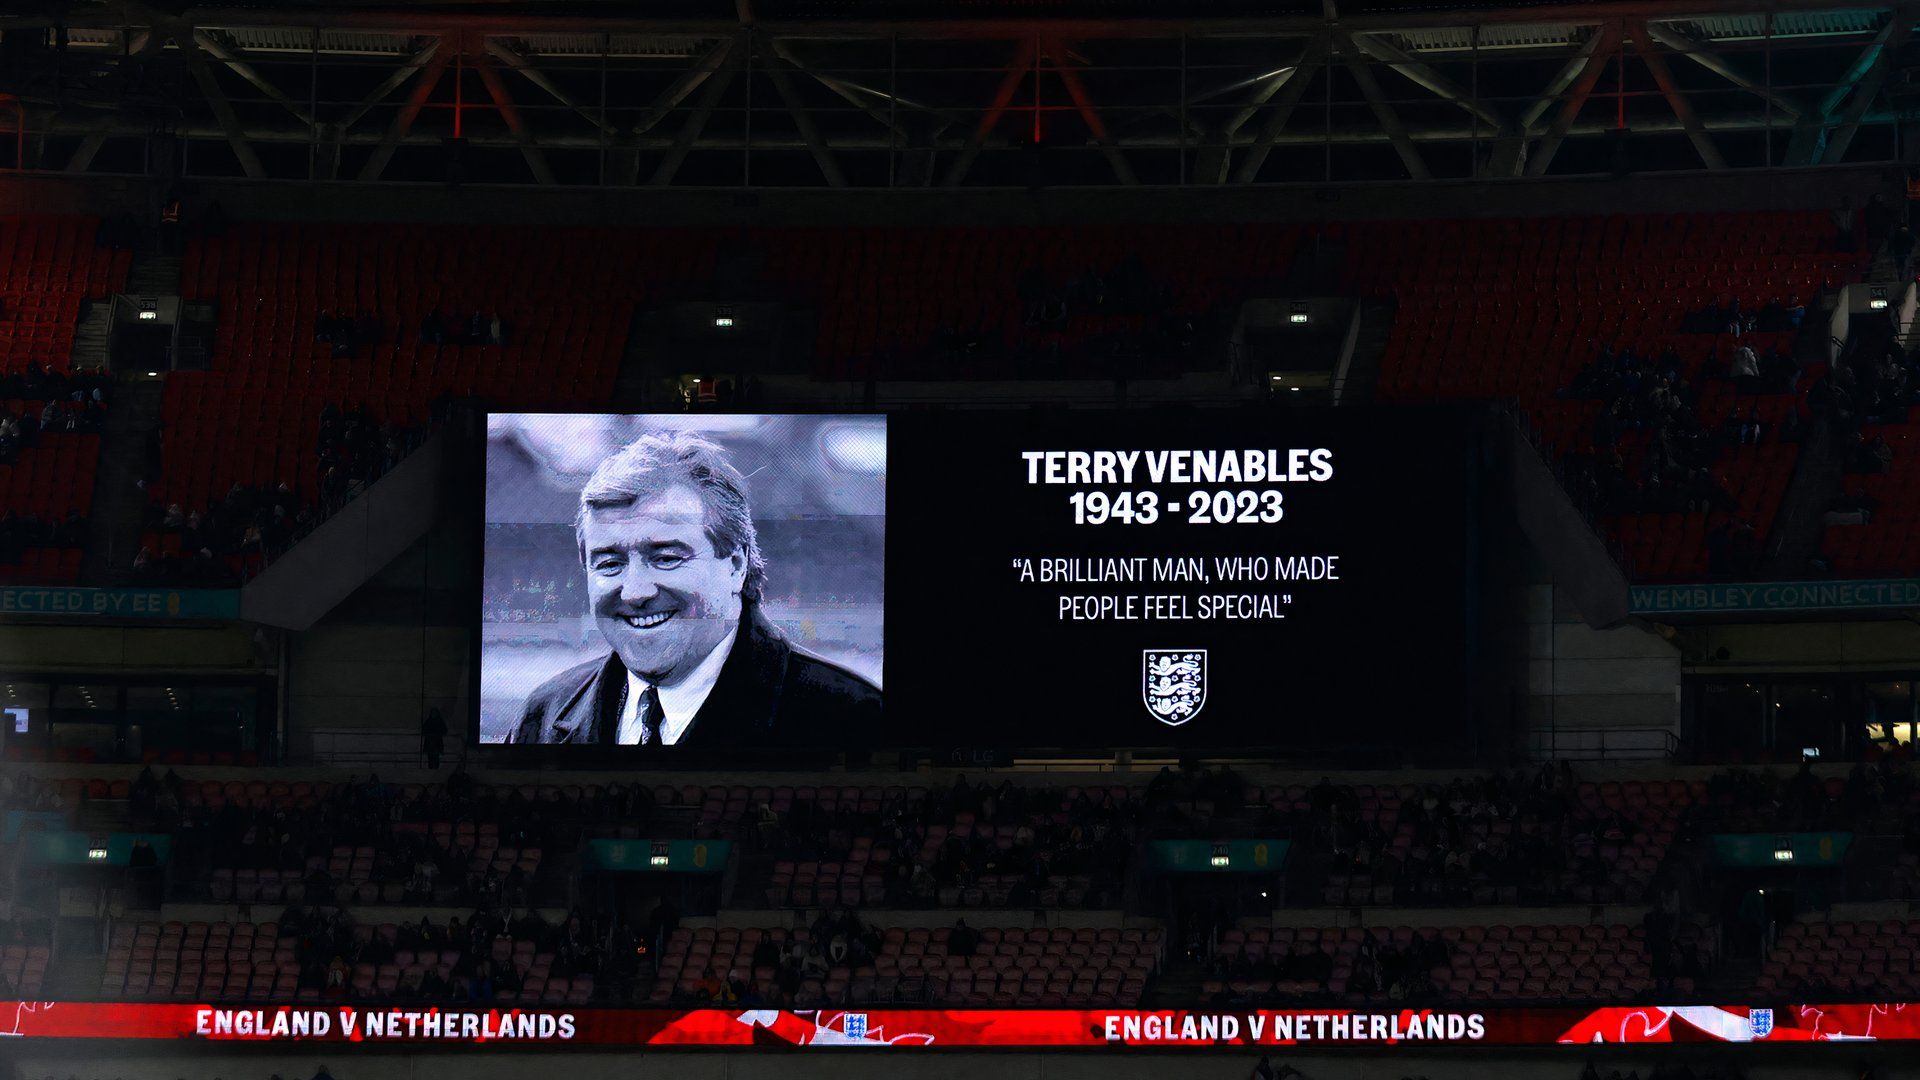 The late QPR and England manager Terry Venables